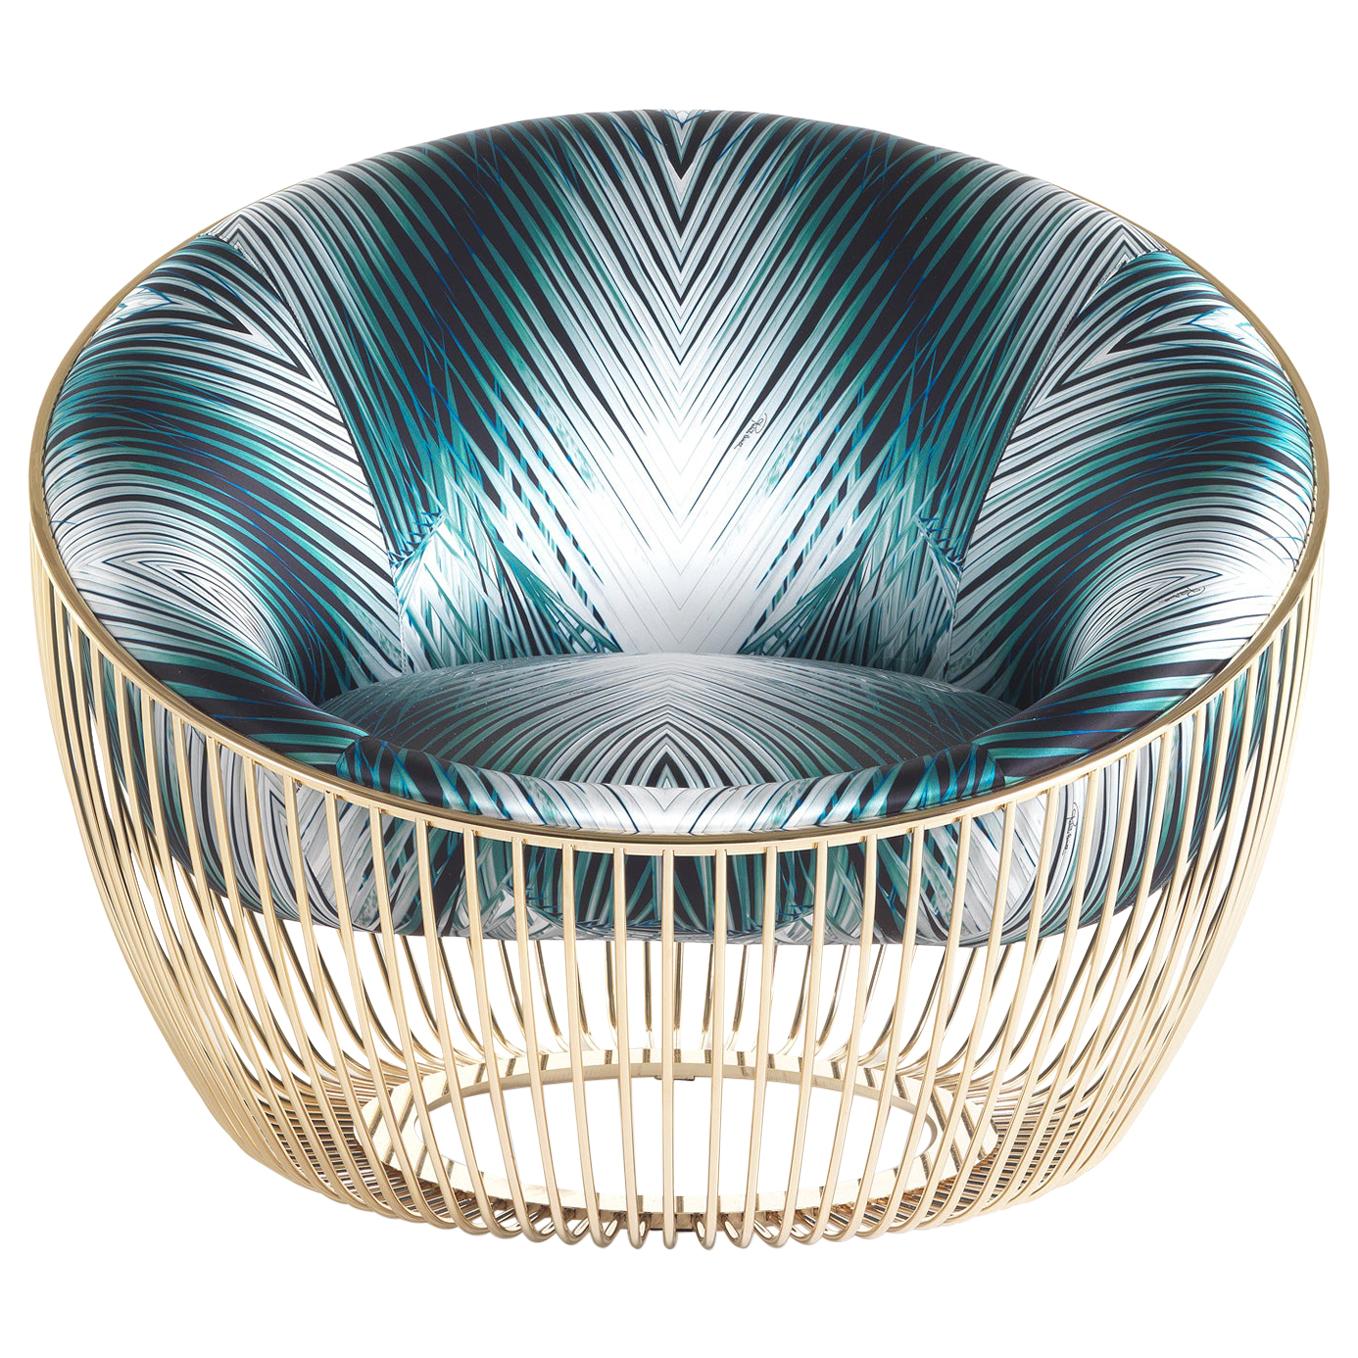 21st Century Cosmopolitan Armchair in Fabric by Roberto Cavalli Home Interiors  For Sale